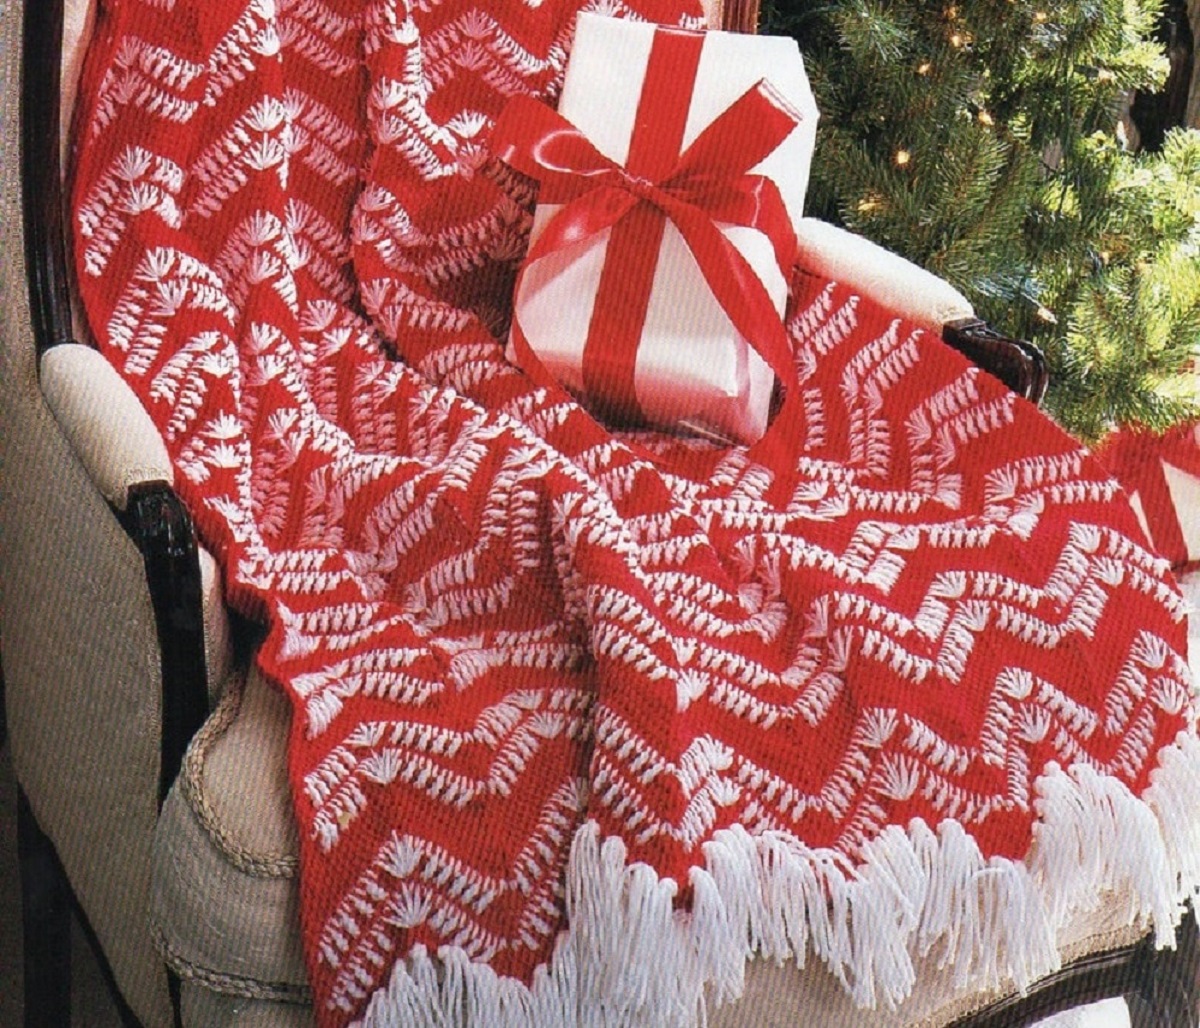 Large red crochet Afghan with white zig zag stripes across the blanket and white tassels on the bottom draped over a white chair.